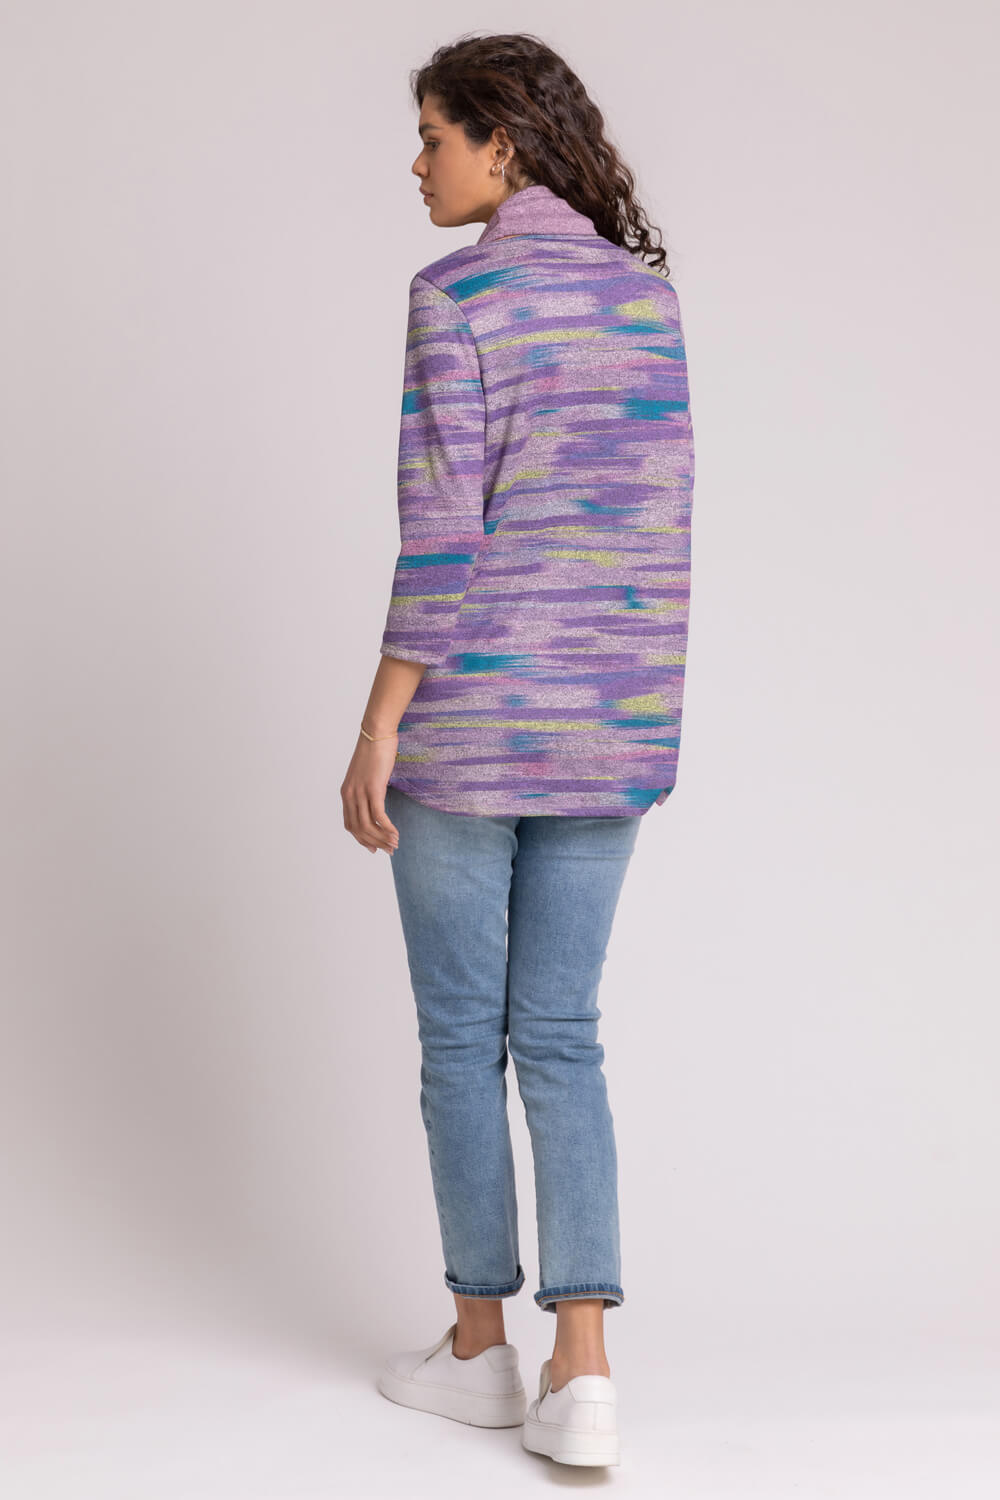 Lilac Abstract Print Pocket Top with Snood, Image 2 of 4